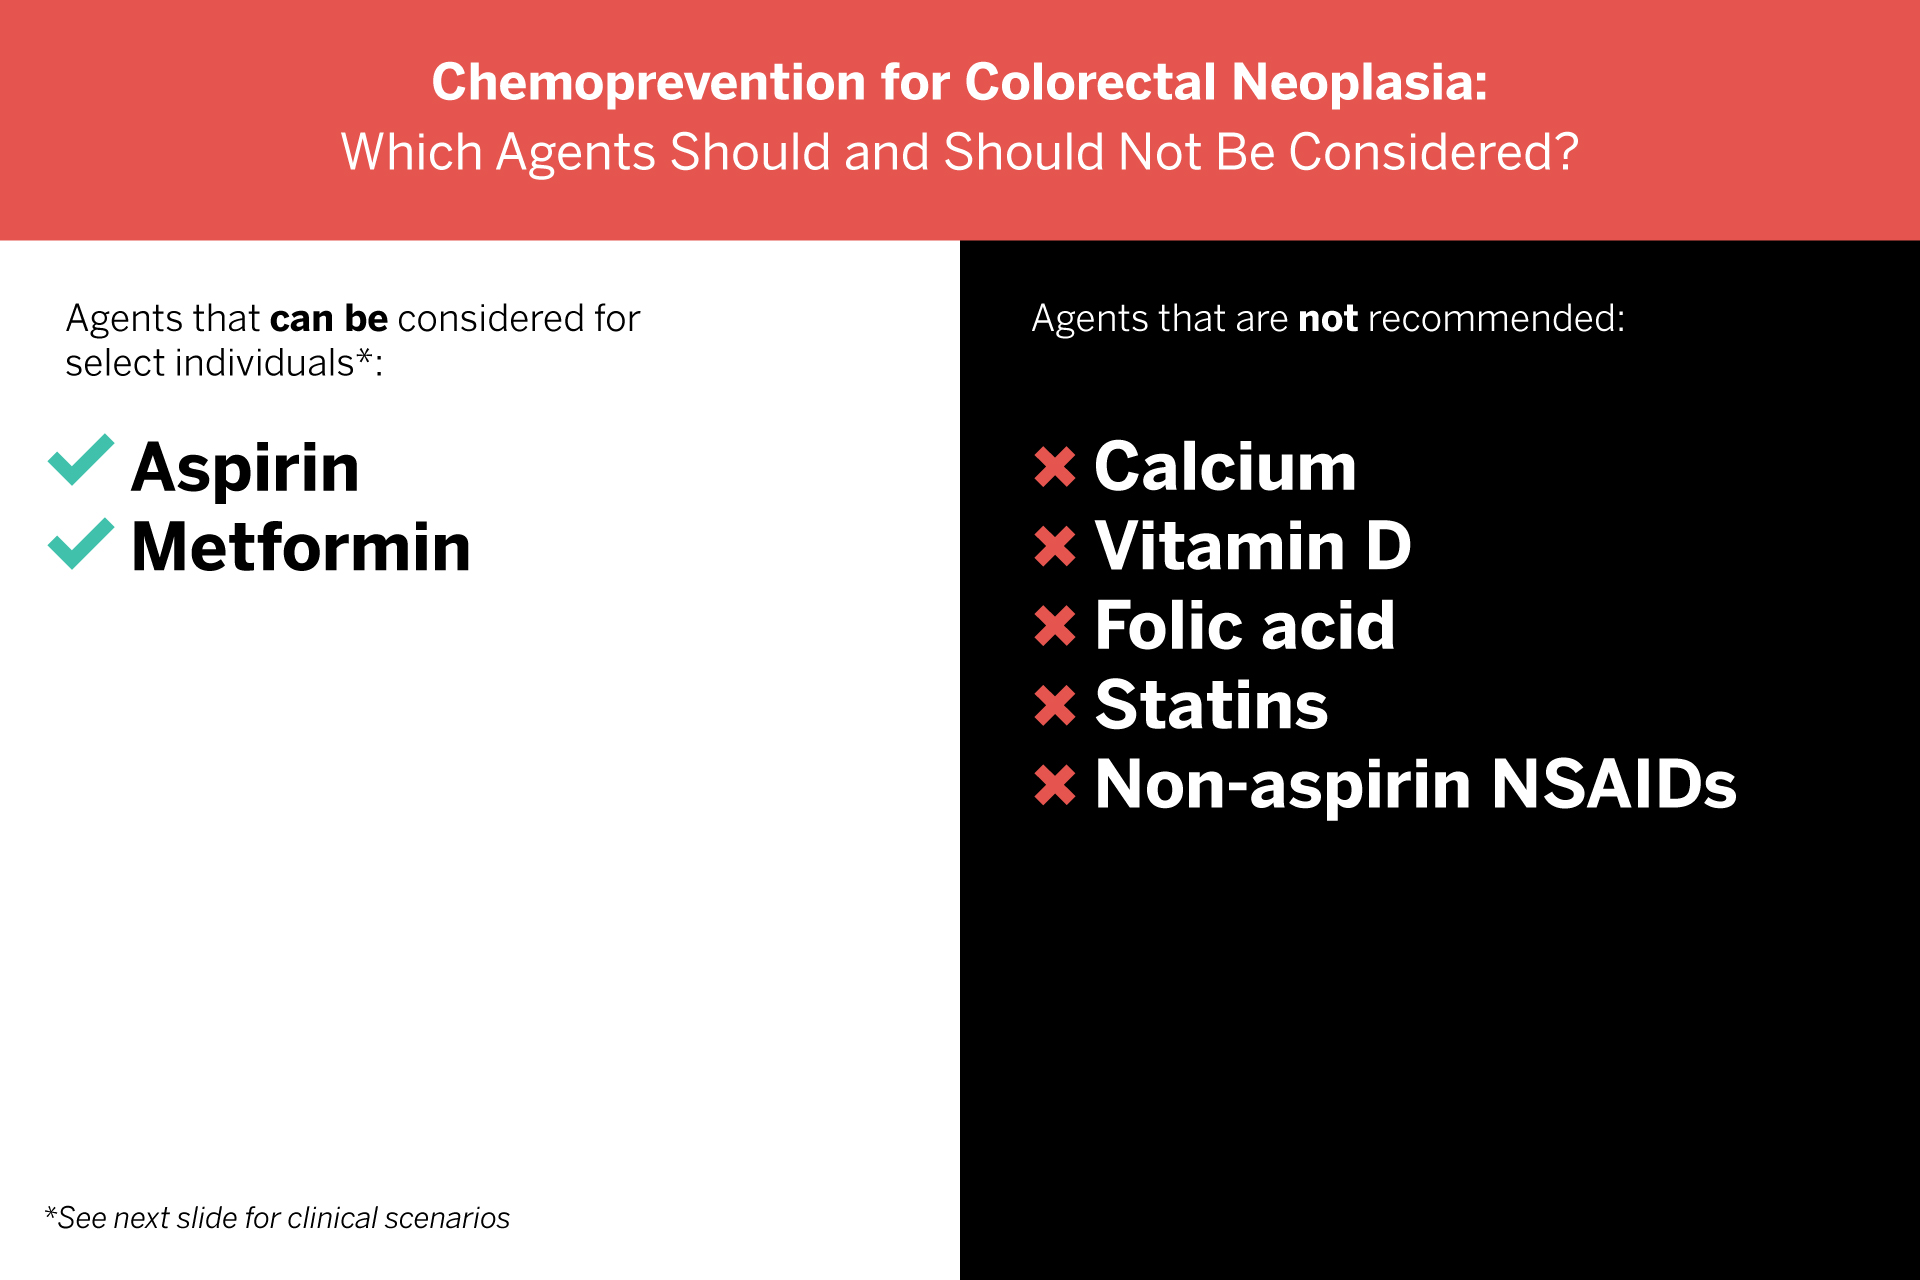 table comparing recommended and not recommended chemoprevention agents